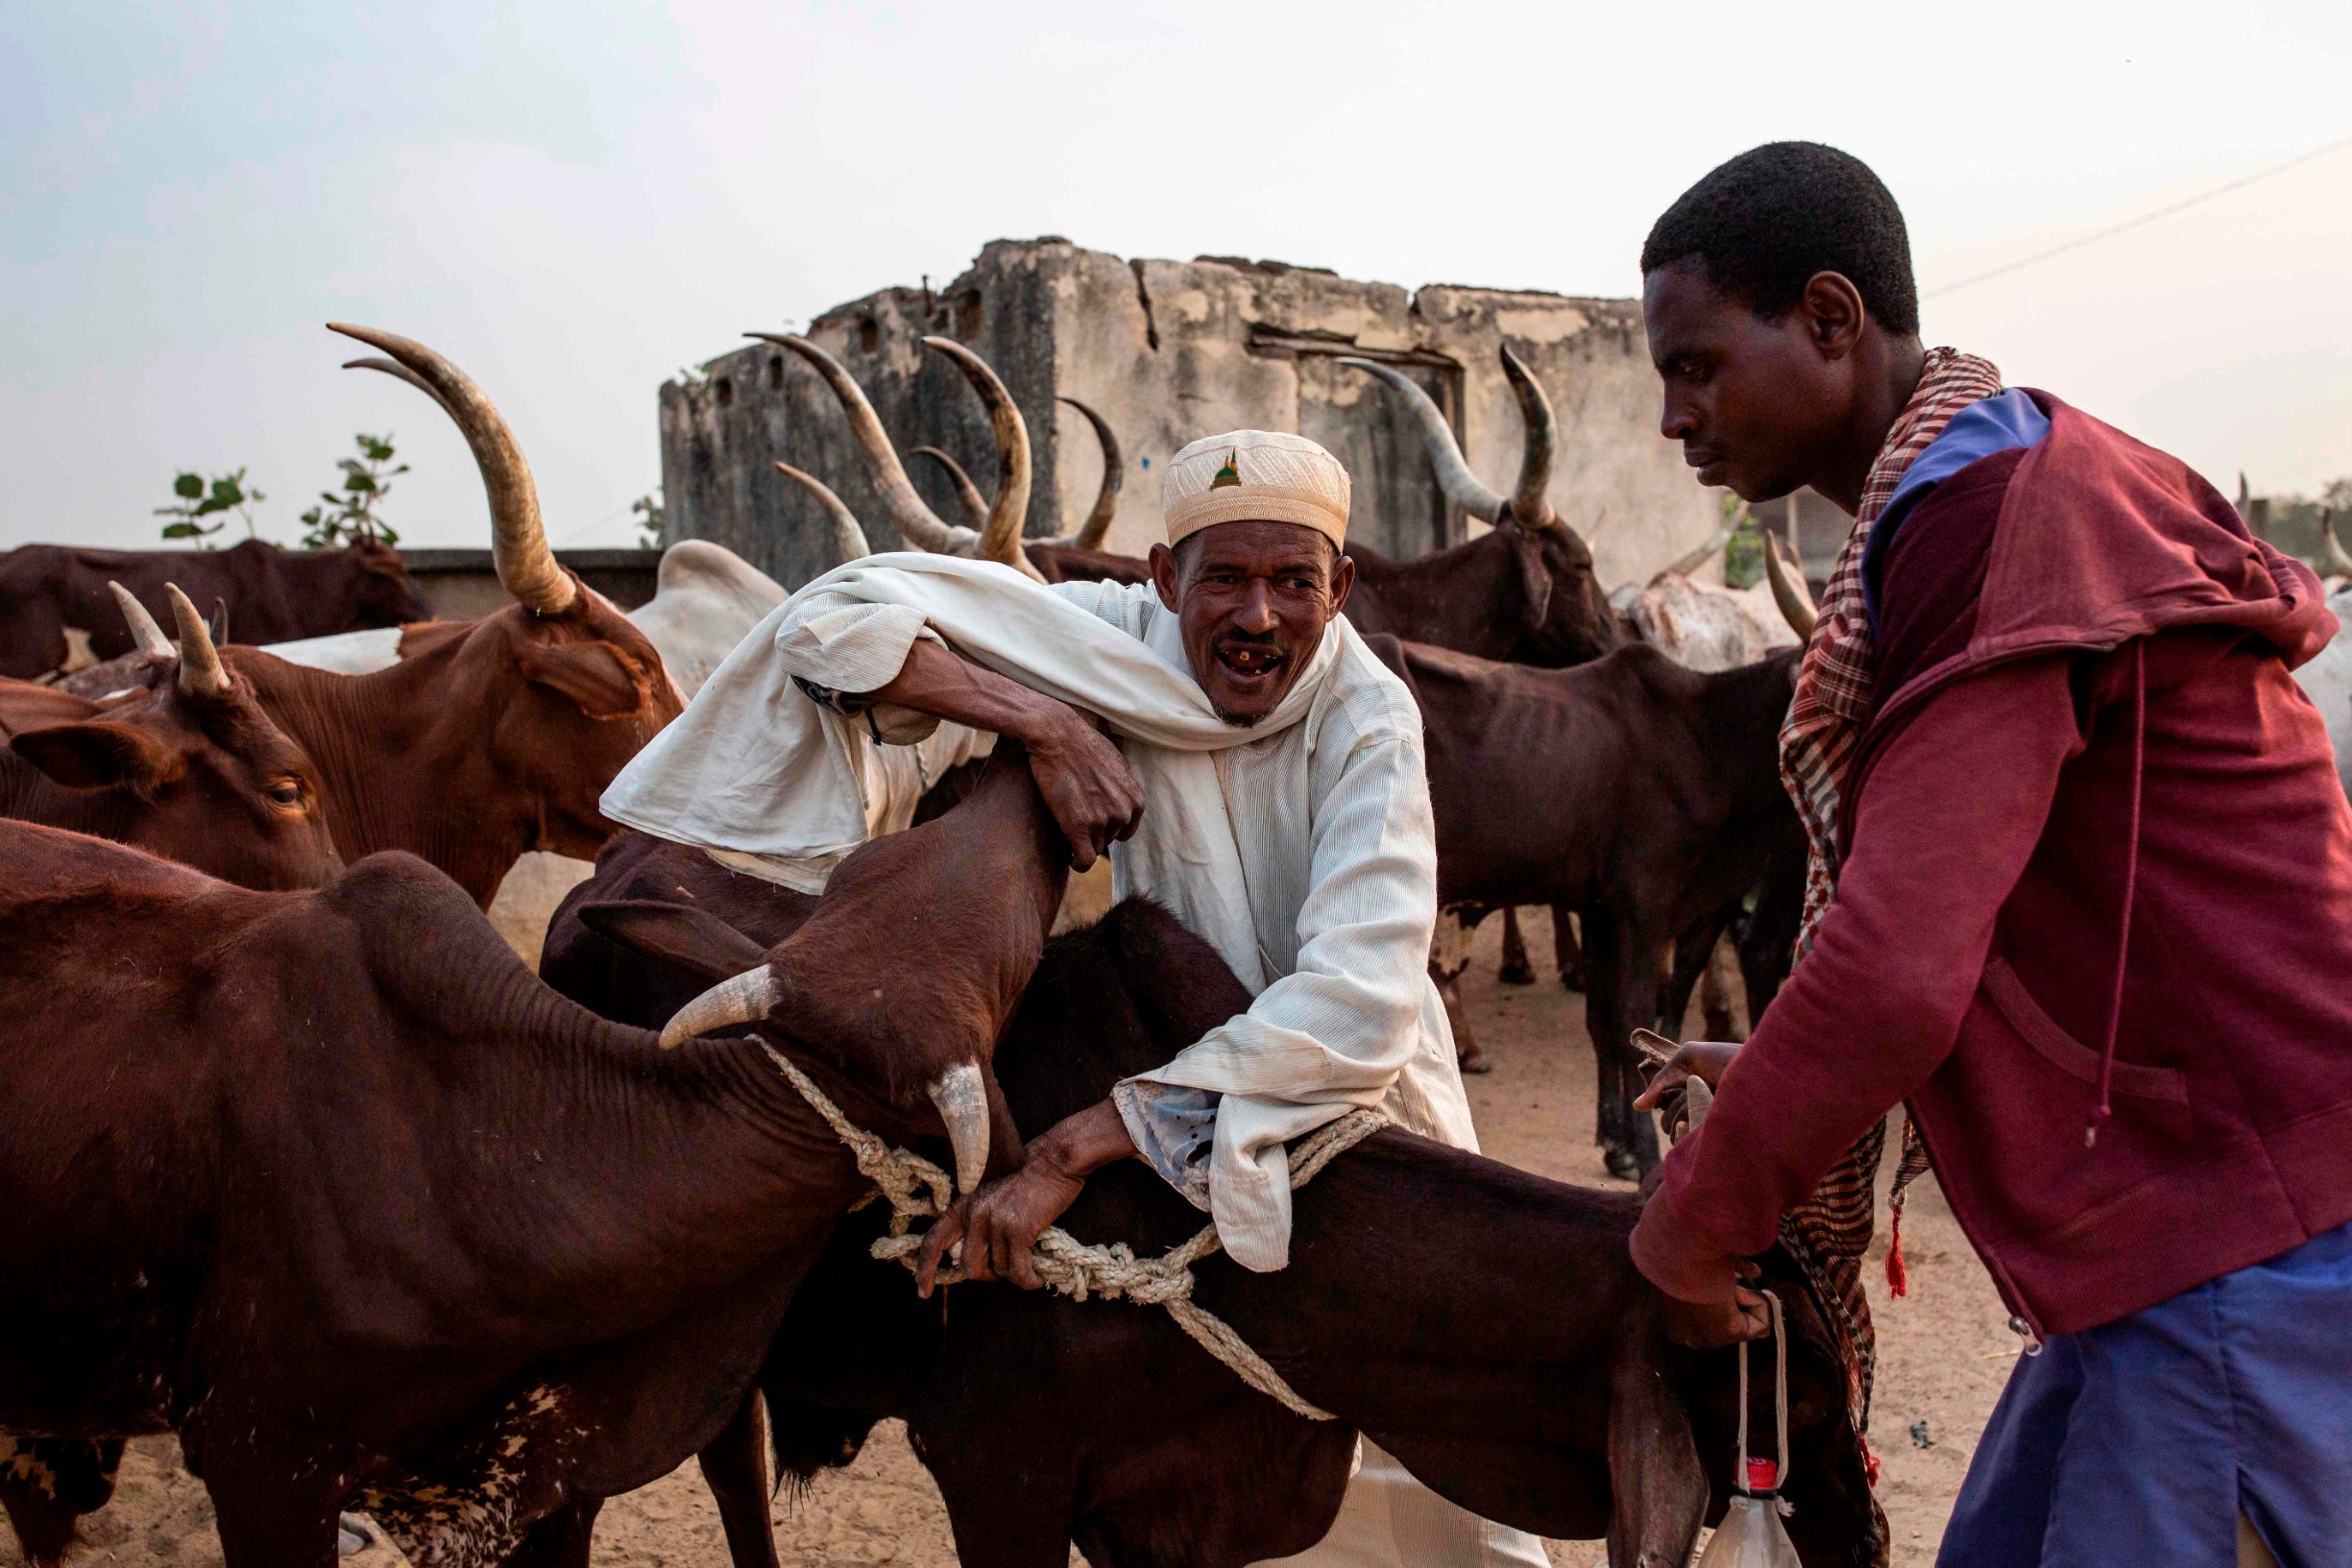 A man holds a cattle at a cattle market in Maroua on March 2, 2020. - The Far North is the region in Cameroon with the biggest population, also one of the poorest of Cameroon, and where most of the Cameroonian cattle is raised. Since 2014, the jihadist group Boko Haram has attacked villages in this region on the border of Chad and Nigeria, and clashes between the army and Boko Haram have pushed villagers to flee their homes. (Photo by patrick meinhardt / AFP)